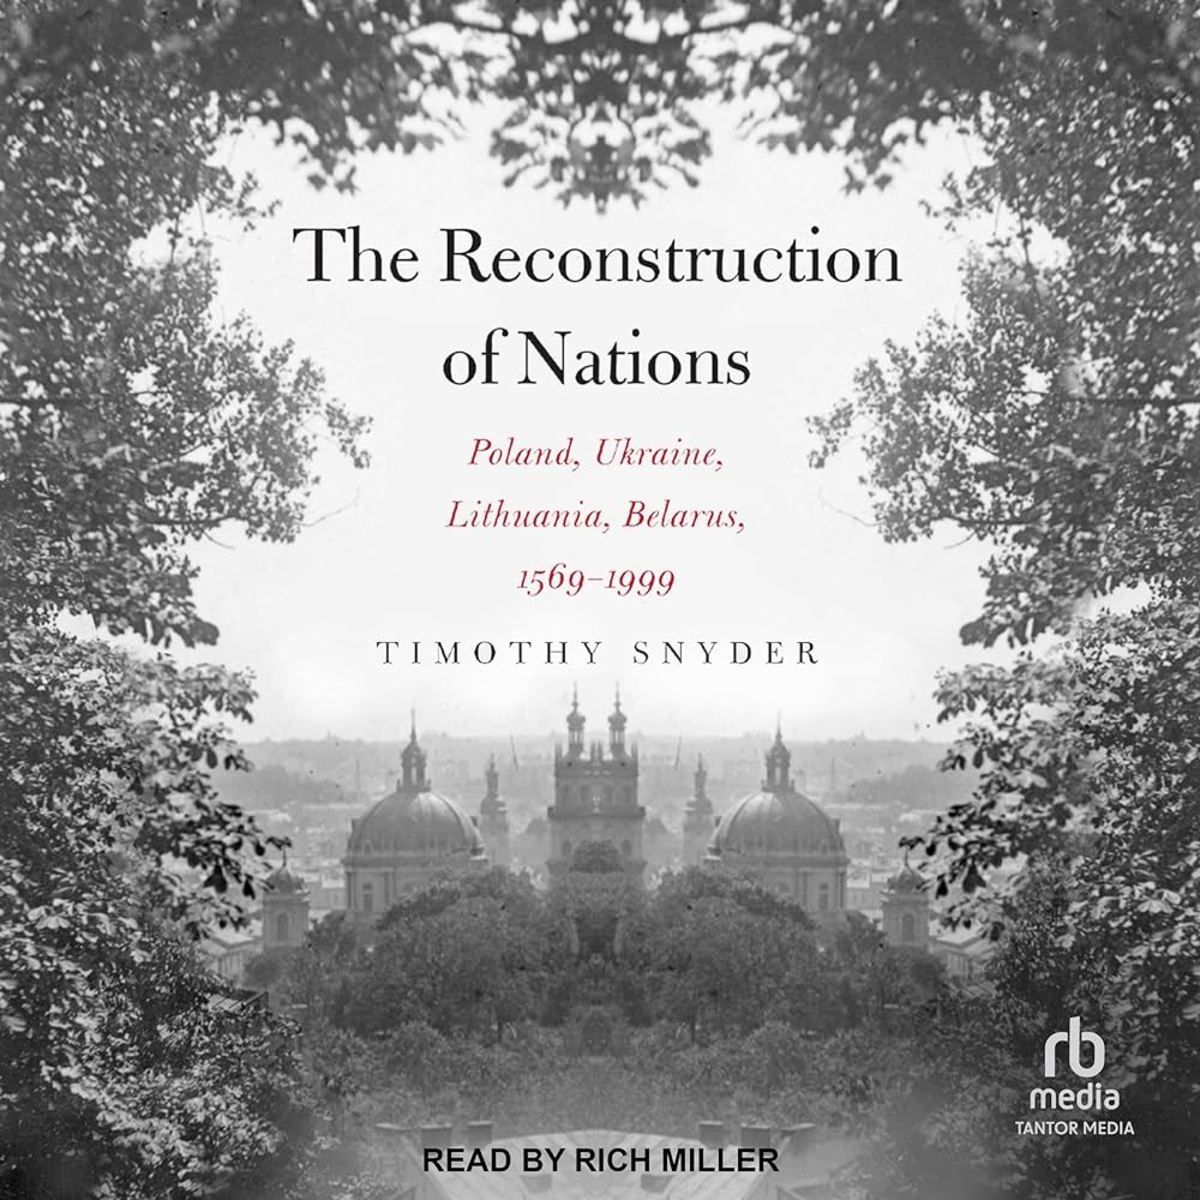 The Reconstruction of Nations, Poland, Lithuania, Belarus, Ukraine, 1569-1999 Review